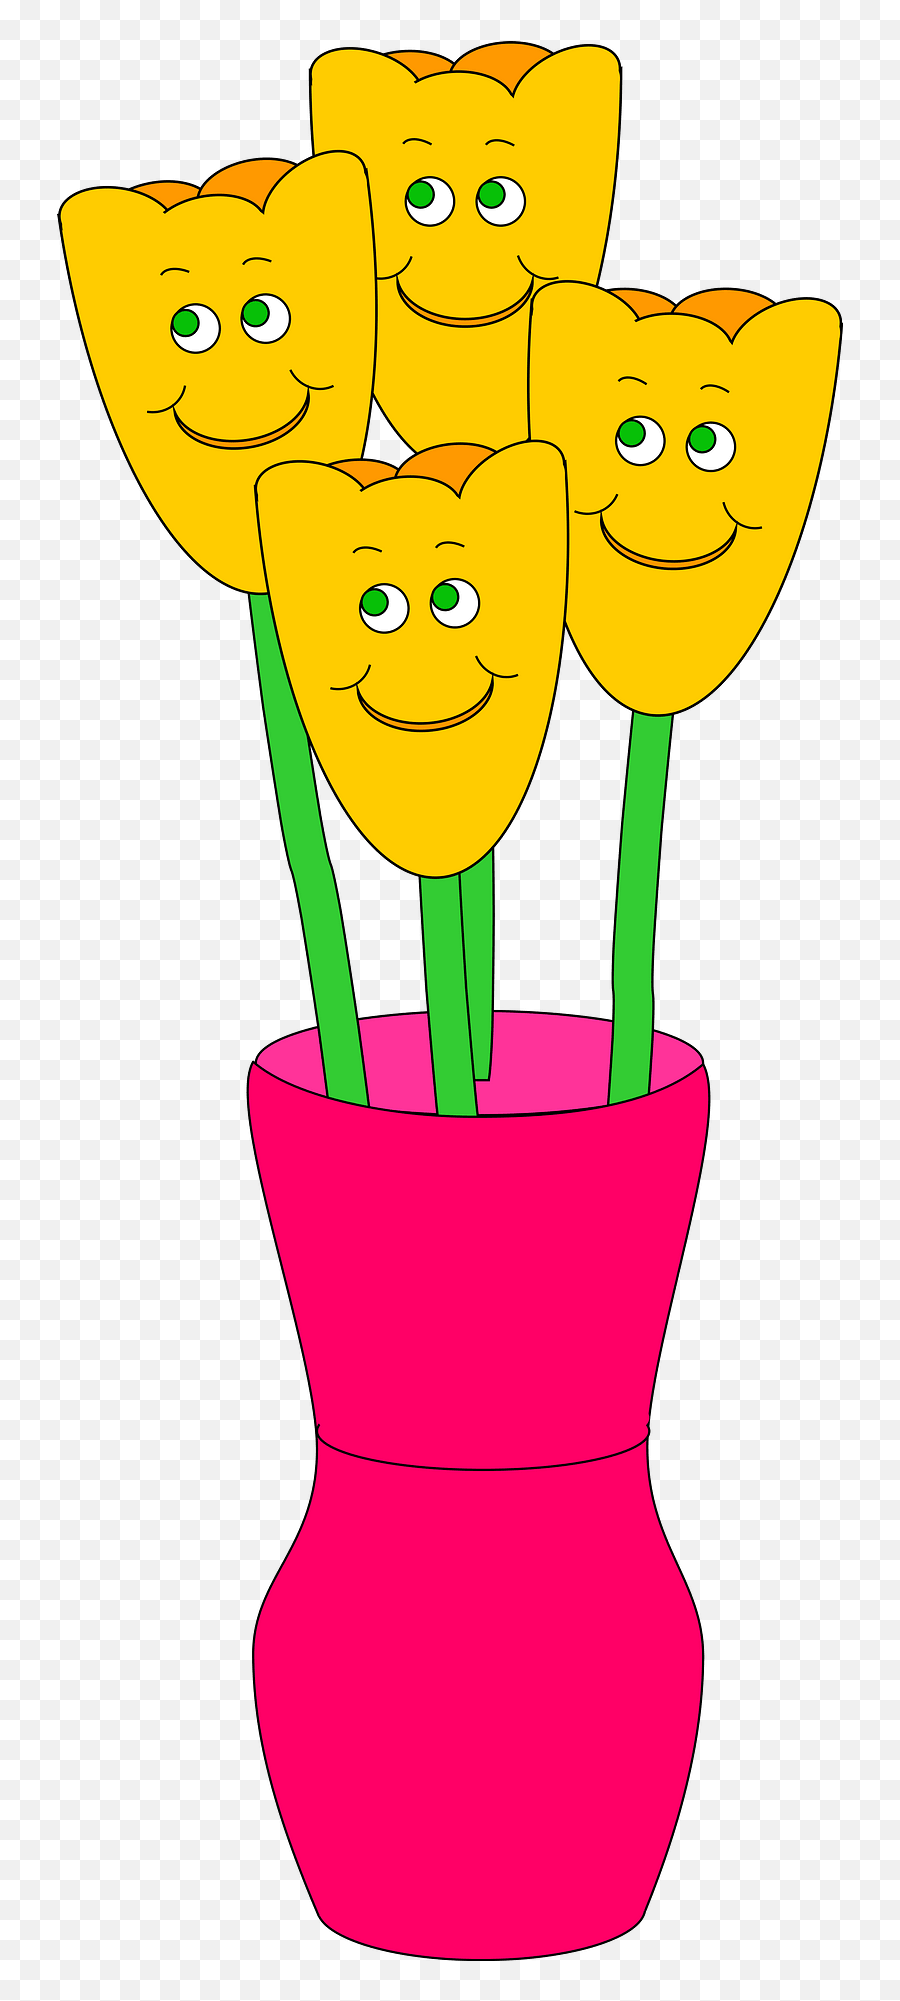 Pink Vase Of Yellow Tulips With Faces - Cartoon Vase With 4 Flowers Emoji,Faces Clipart